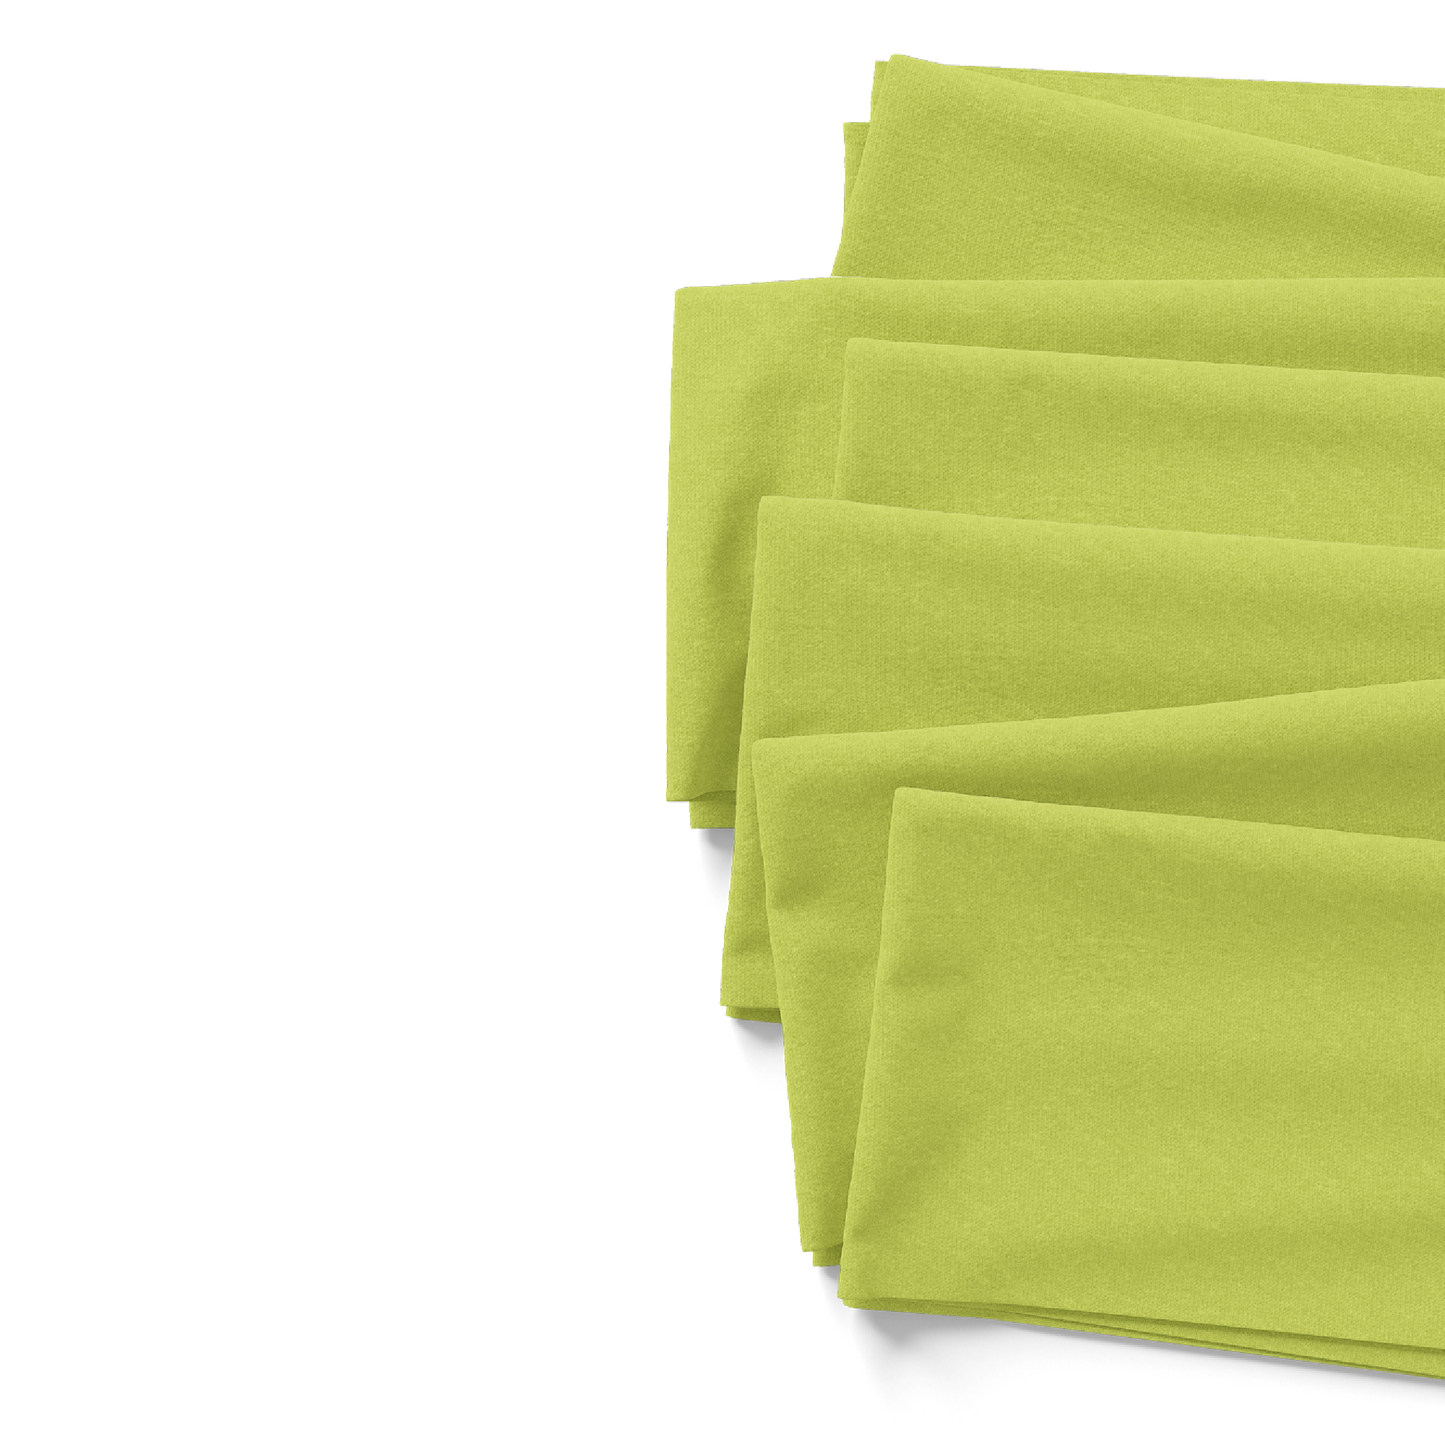 Liverpool, Ribbed, DBP, Polyester, and Neoprene Spring Easter fabric by the yard in avocado green.